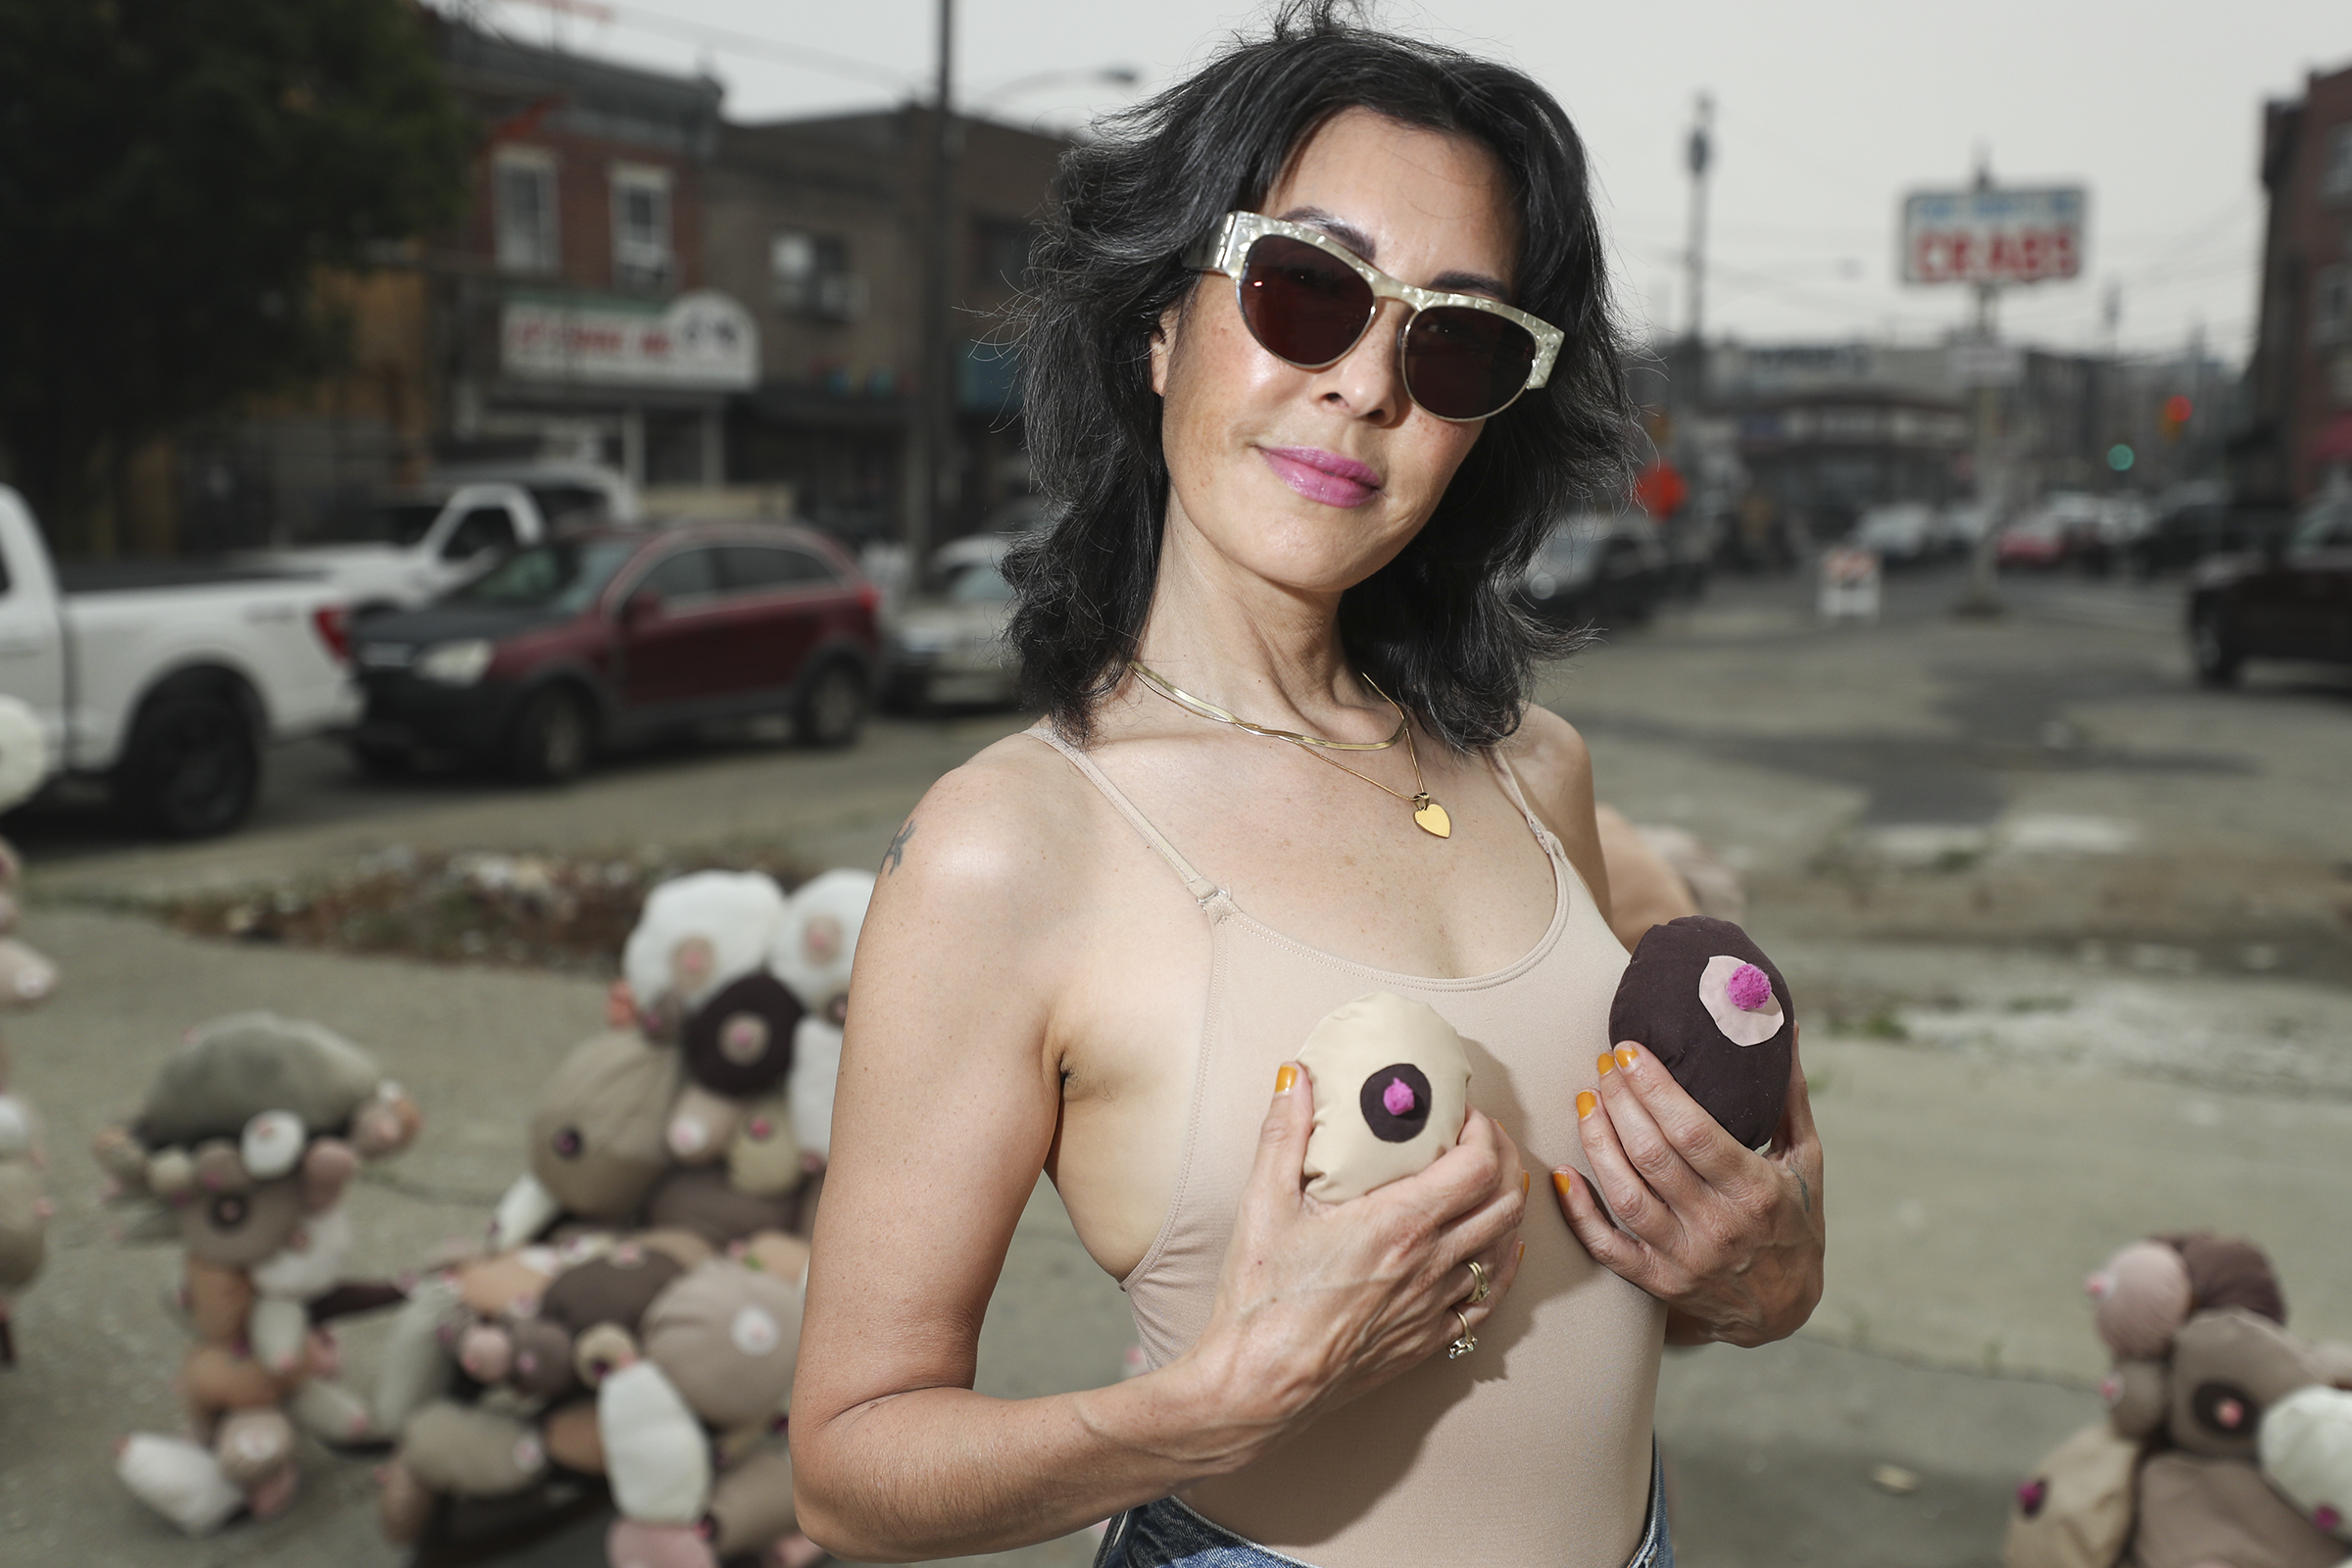 The 'Boob Furniture' in an empty South Philly lot is the work of this  'zany' artist